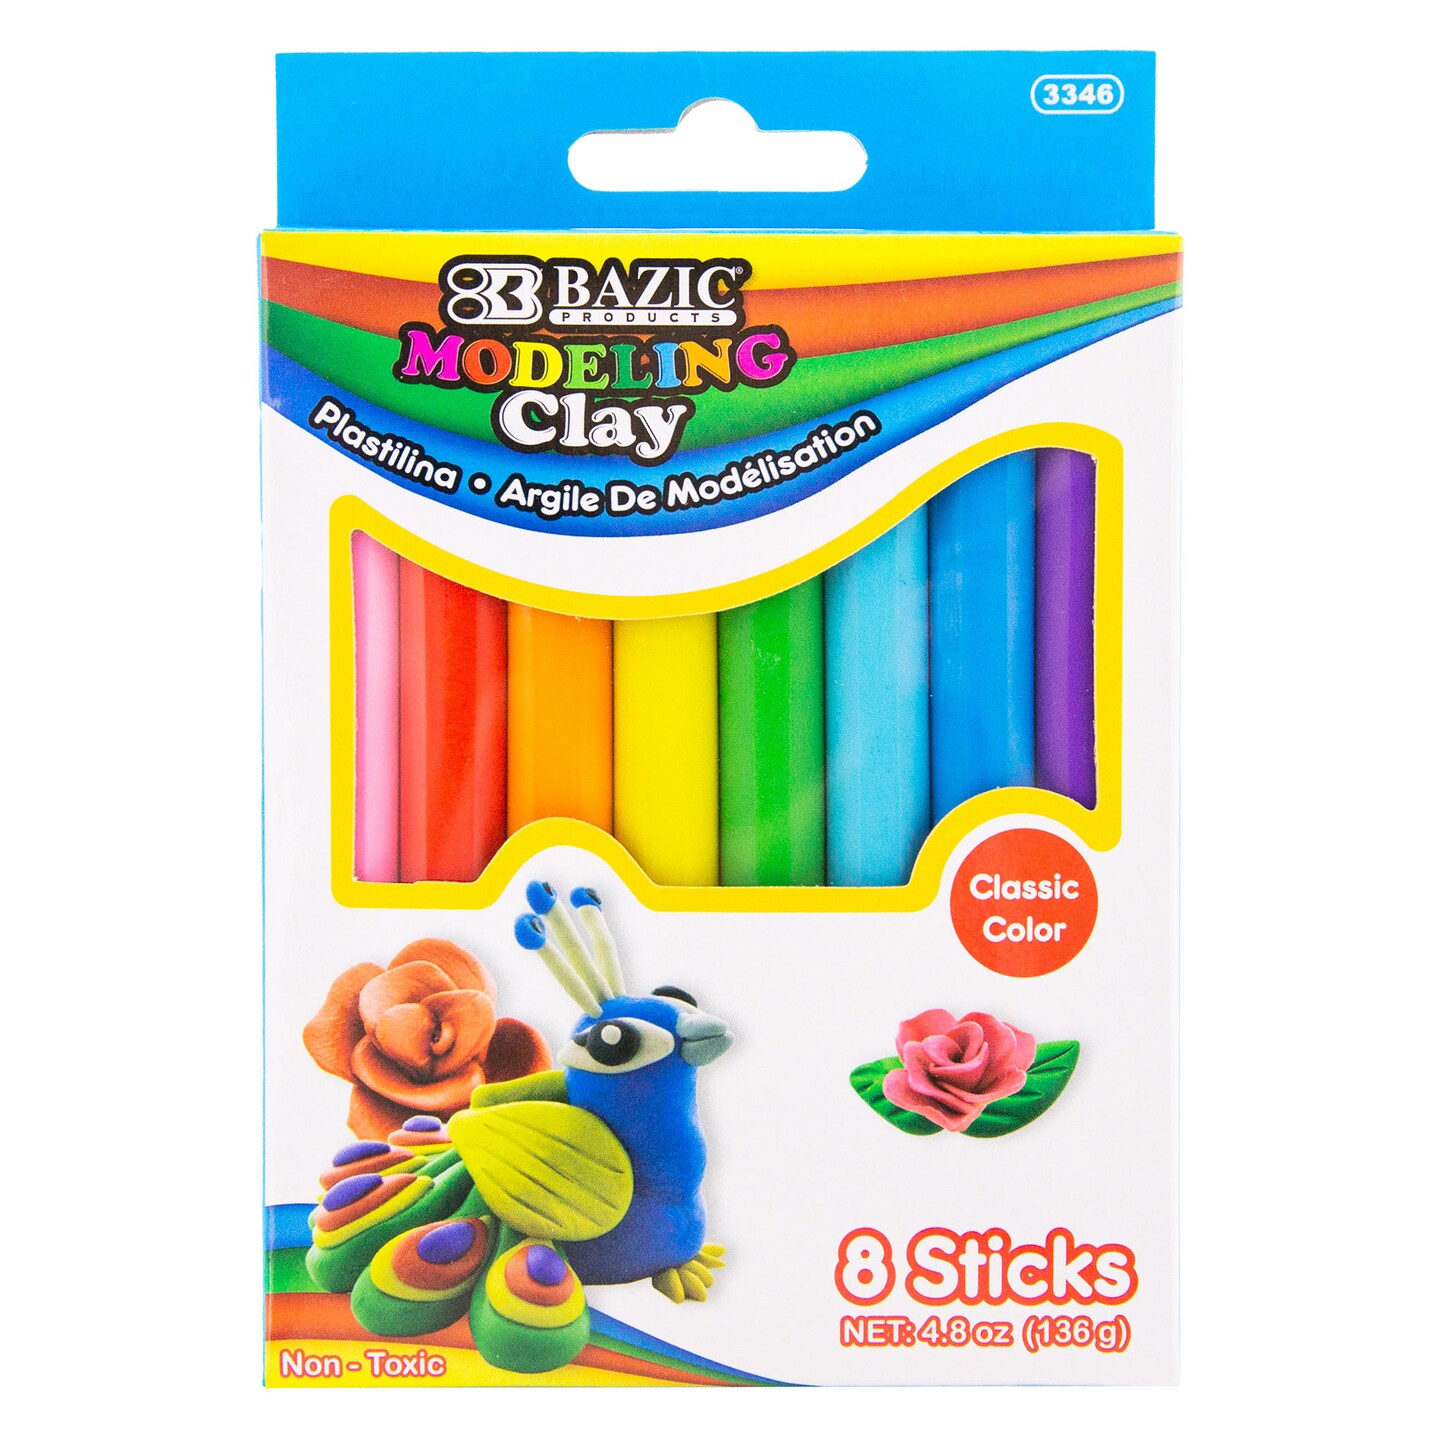 BAZIC Modeling Clay Sticks 8 Primary Colors 4.8 Oz